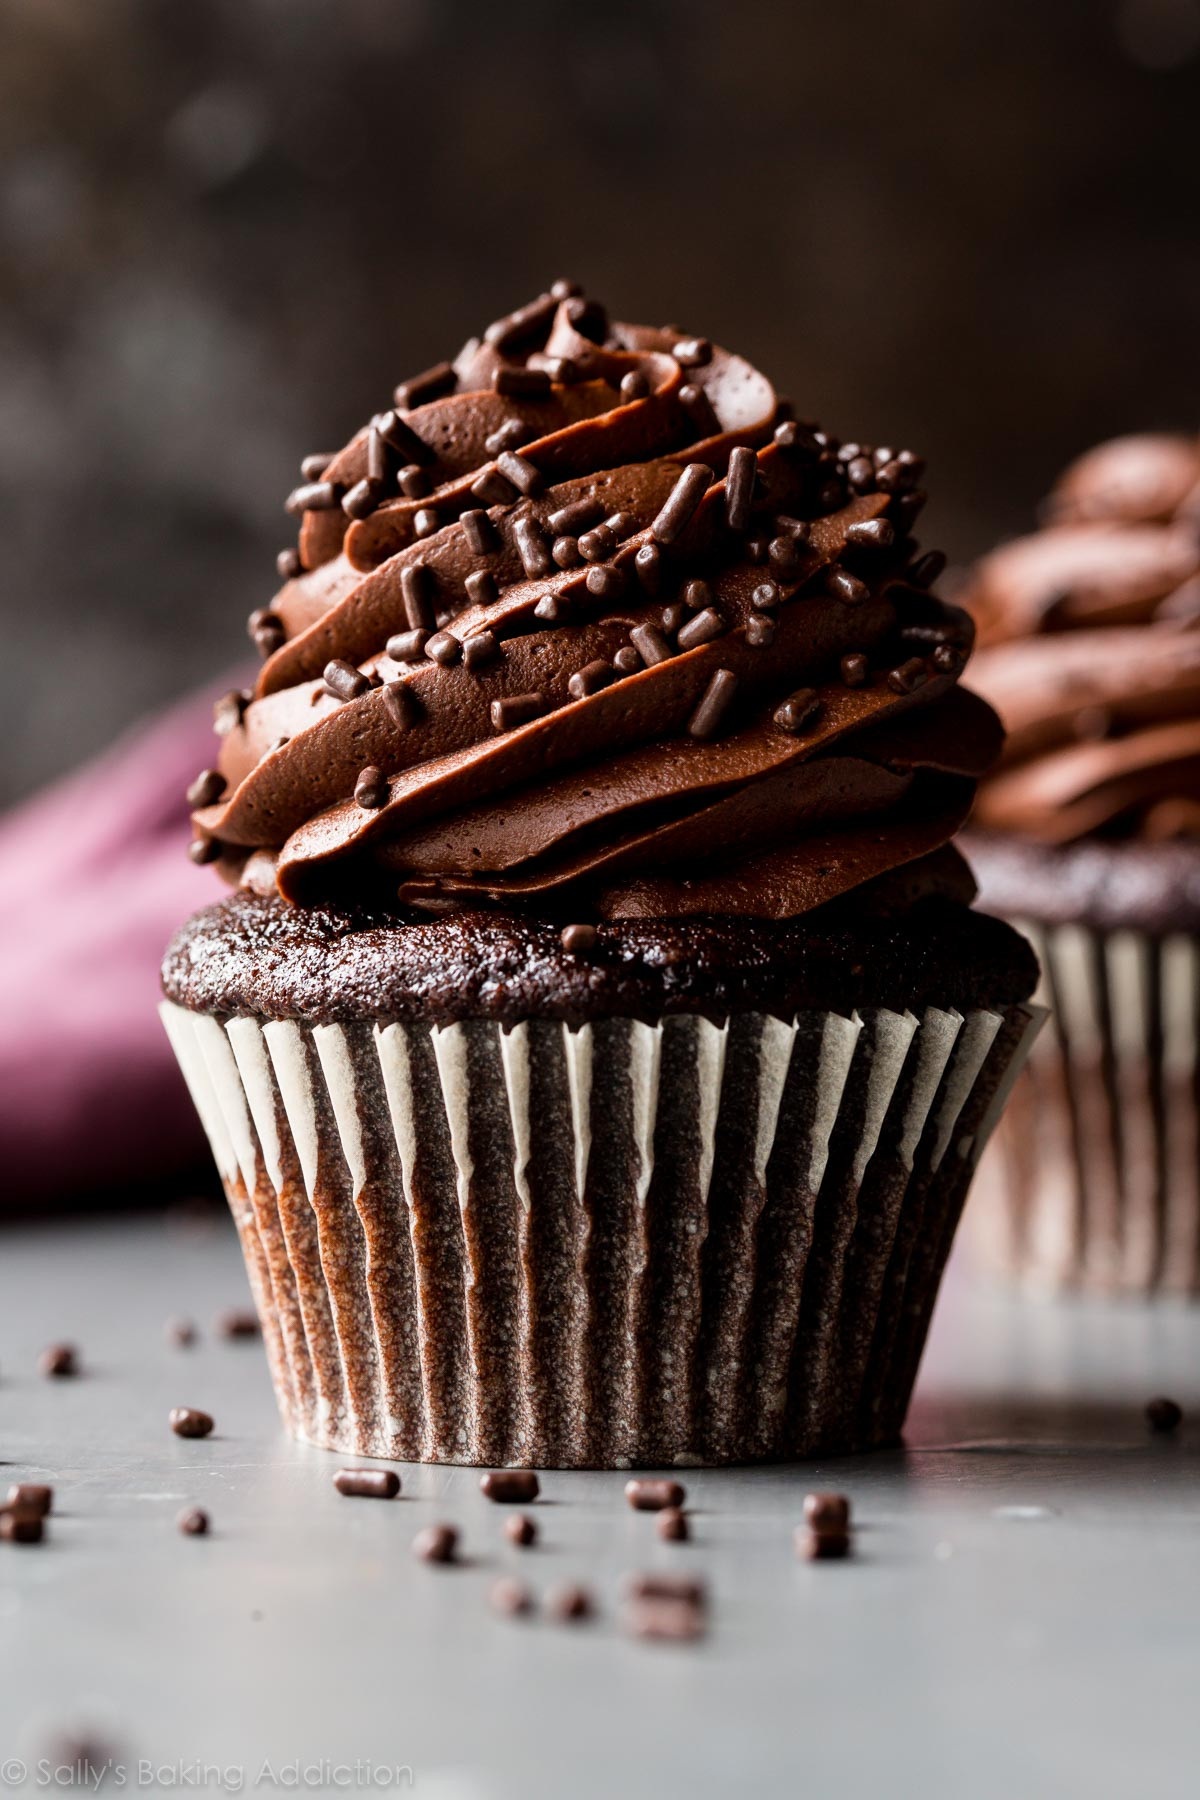 Best Sallys Baking Addiction Chocolate Cupcakes Collections